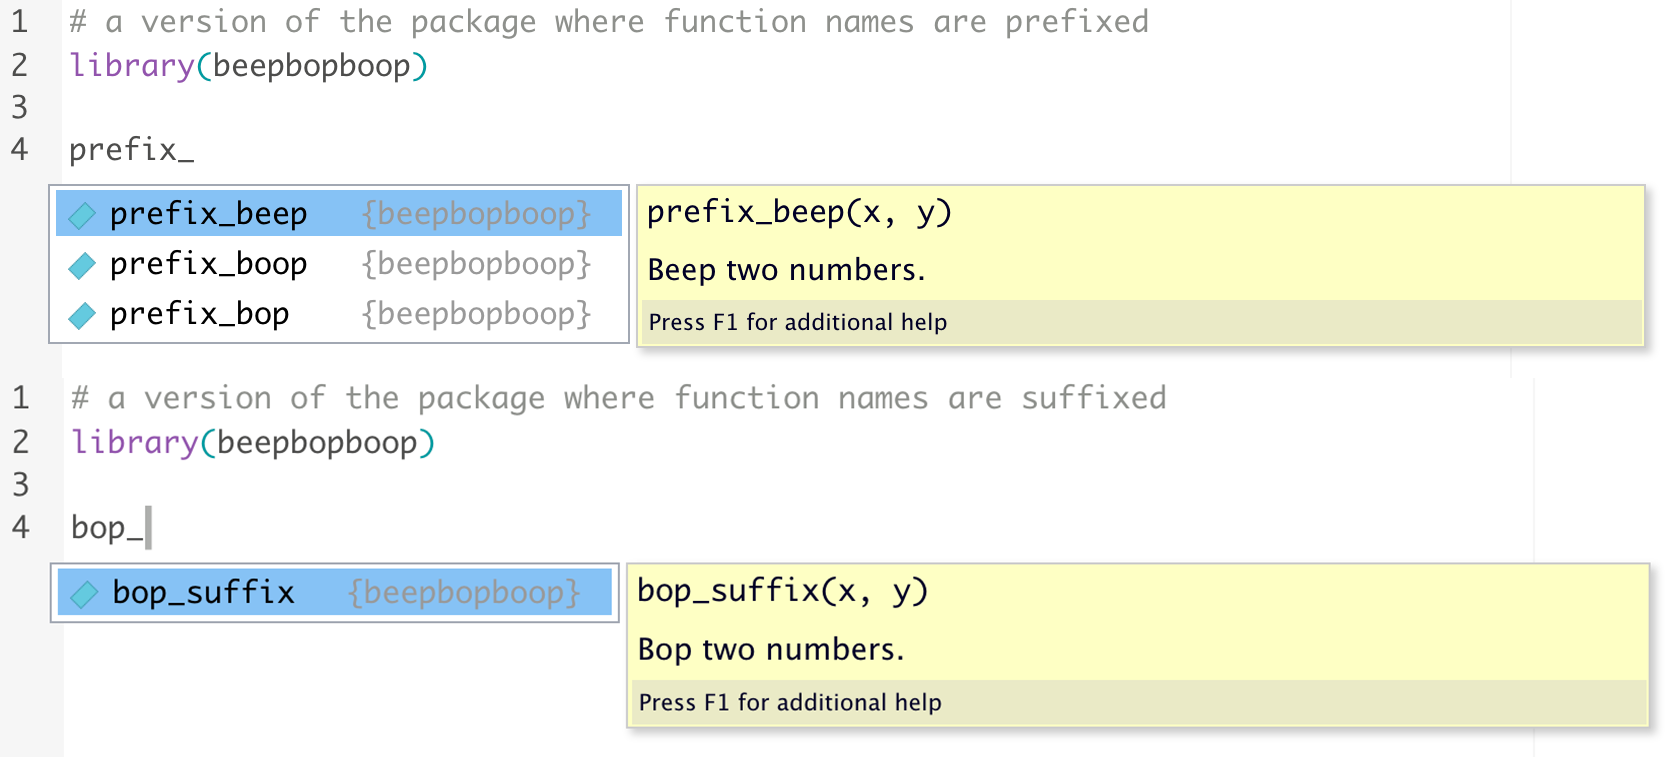 A screenshot of an R script loading alternate versions of a 'beepbopboop' package. In the first version, the package implements the beep, bop, and boop functions as prefix underscore beep, prefix underscore bop, and prefix underscore boop. in the second, they are implemented as beep underscore suffix, bop underscore suffix, boop underscore suffix. Resultantly, when the first version of the package is loaded, when one types 'prefix', the tooltip suggests all three functions.The second version of the package cannot take advantage of this functionality, for the tooltip can only complete the function name after typing the first three characters bee, bop, or boo.